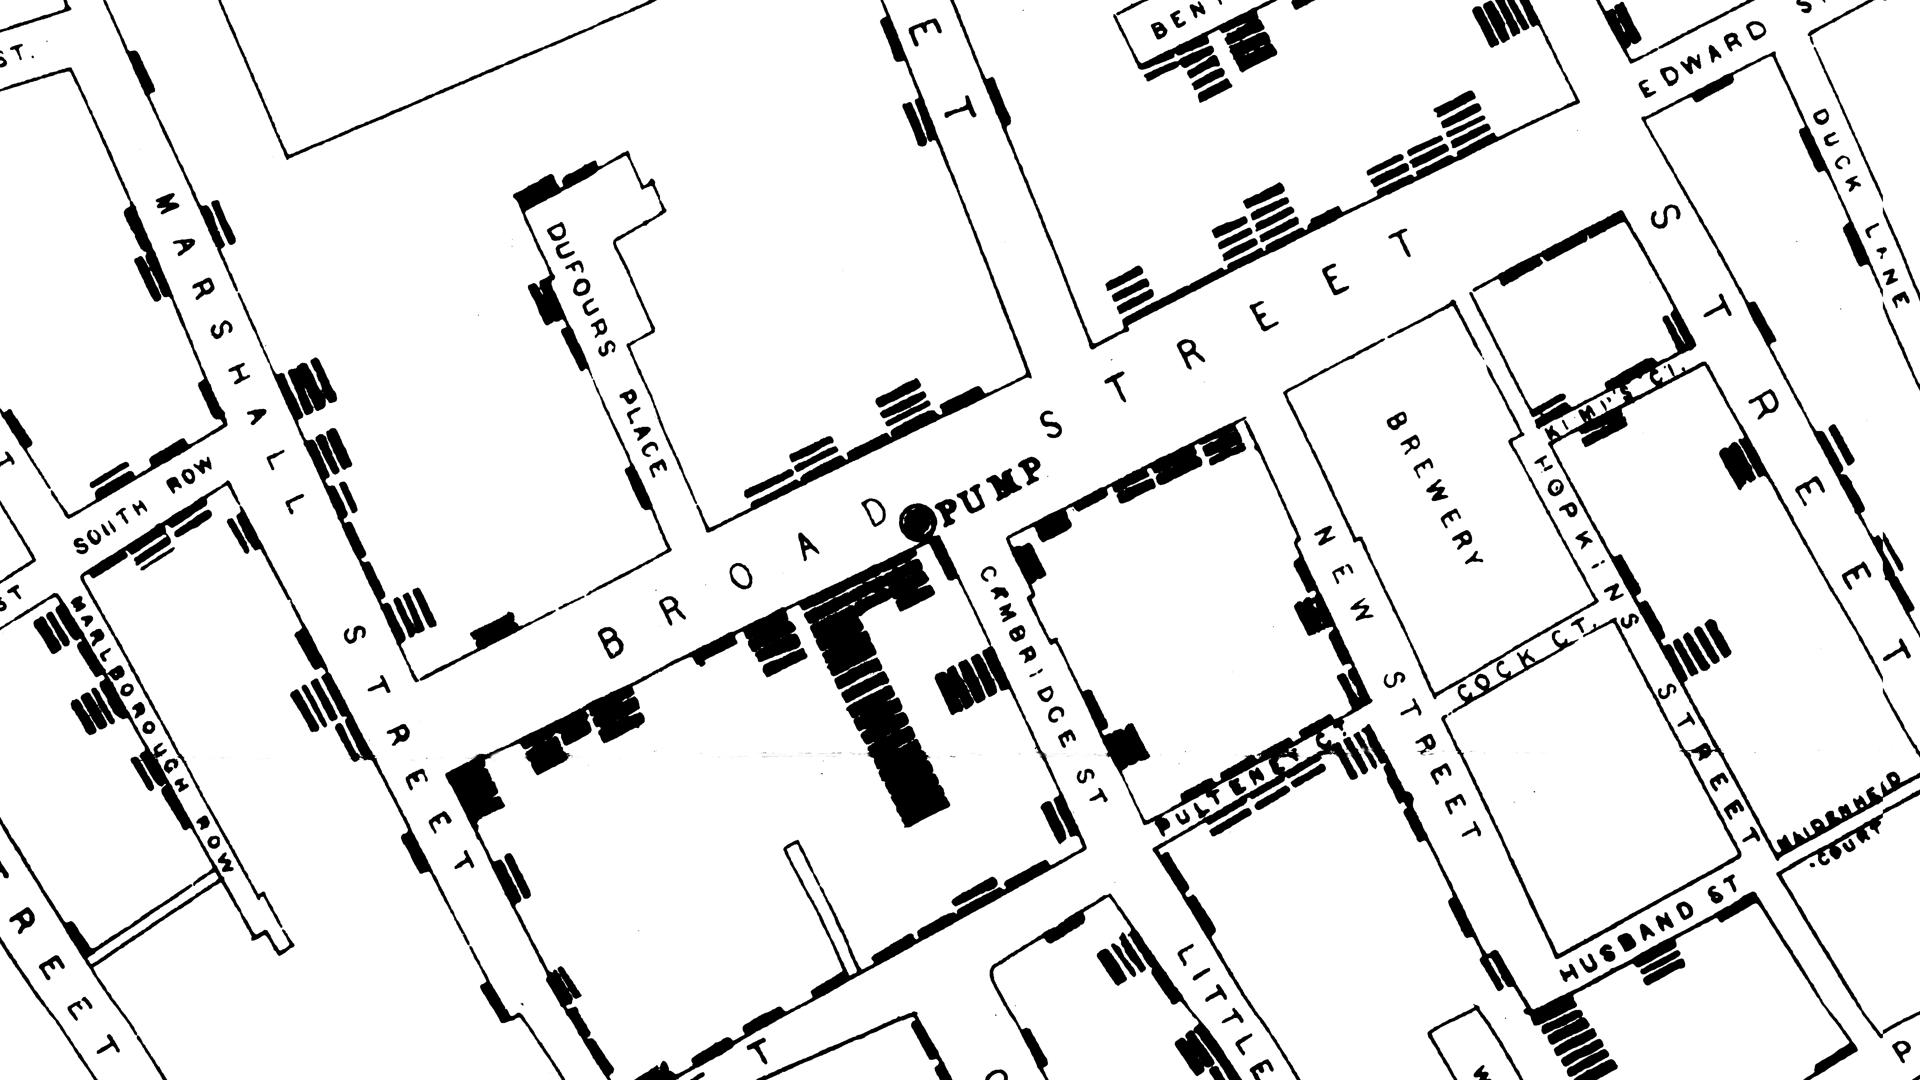 Detail of John Snow's map of the 1854 London cholera outbreak. Drawn by Charles Cheffins.